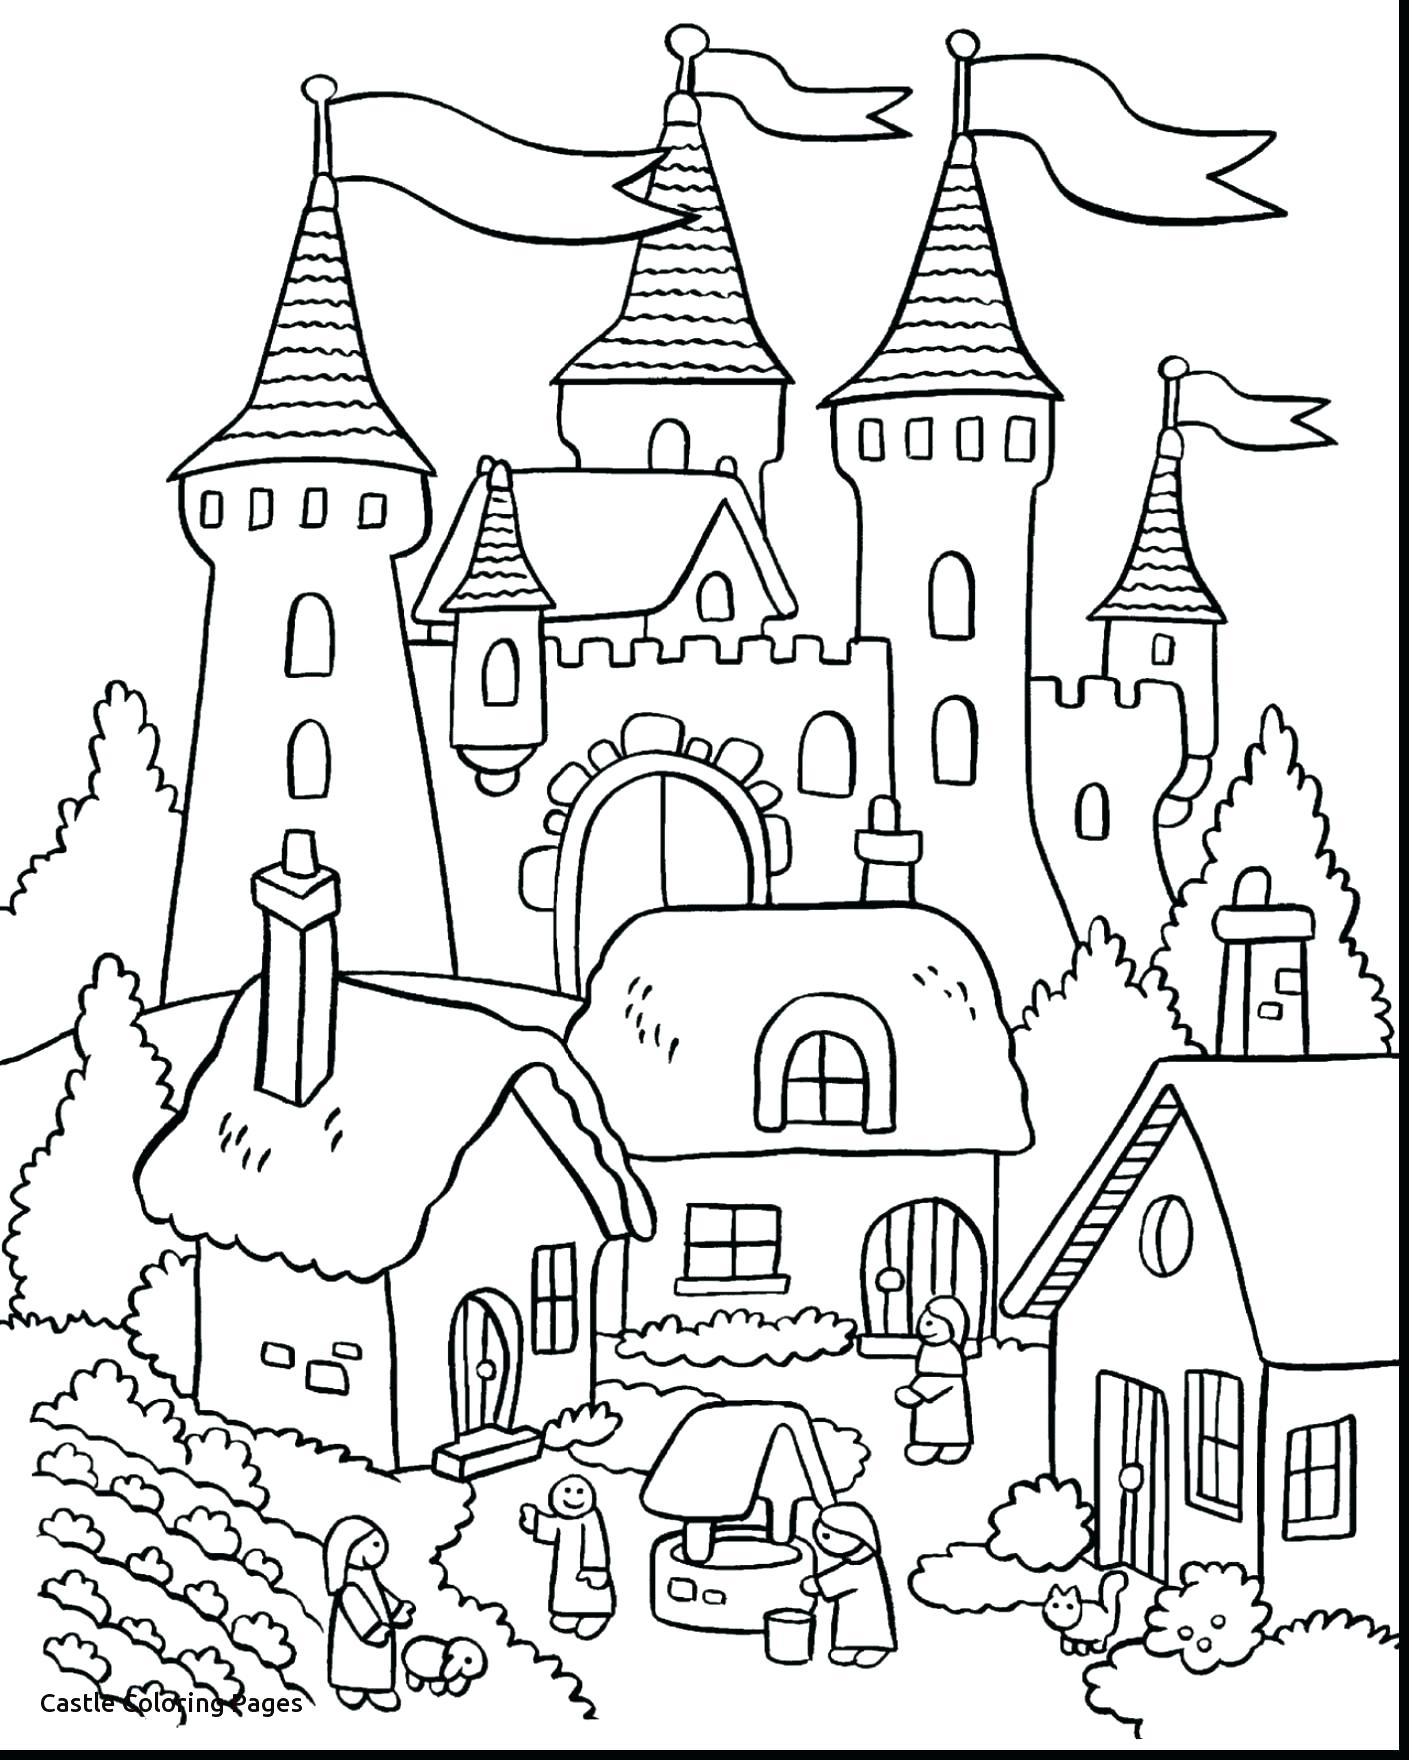 Princess Castle Coloring Page Princess Coloring Pages Frozen Free Sheets Collection New Of Ice